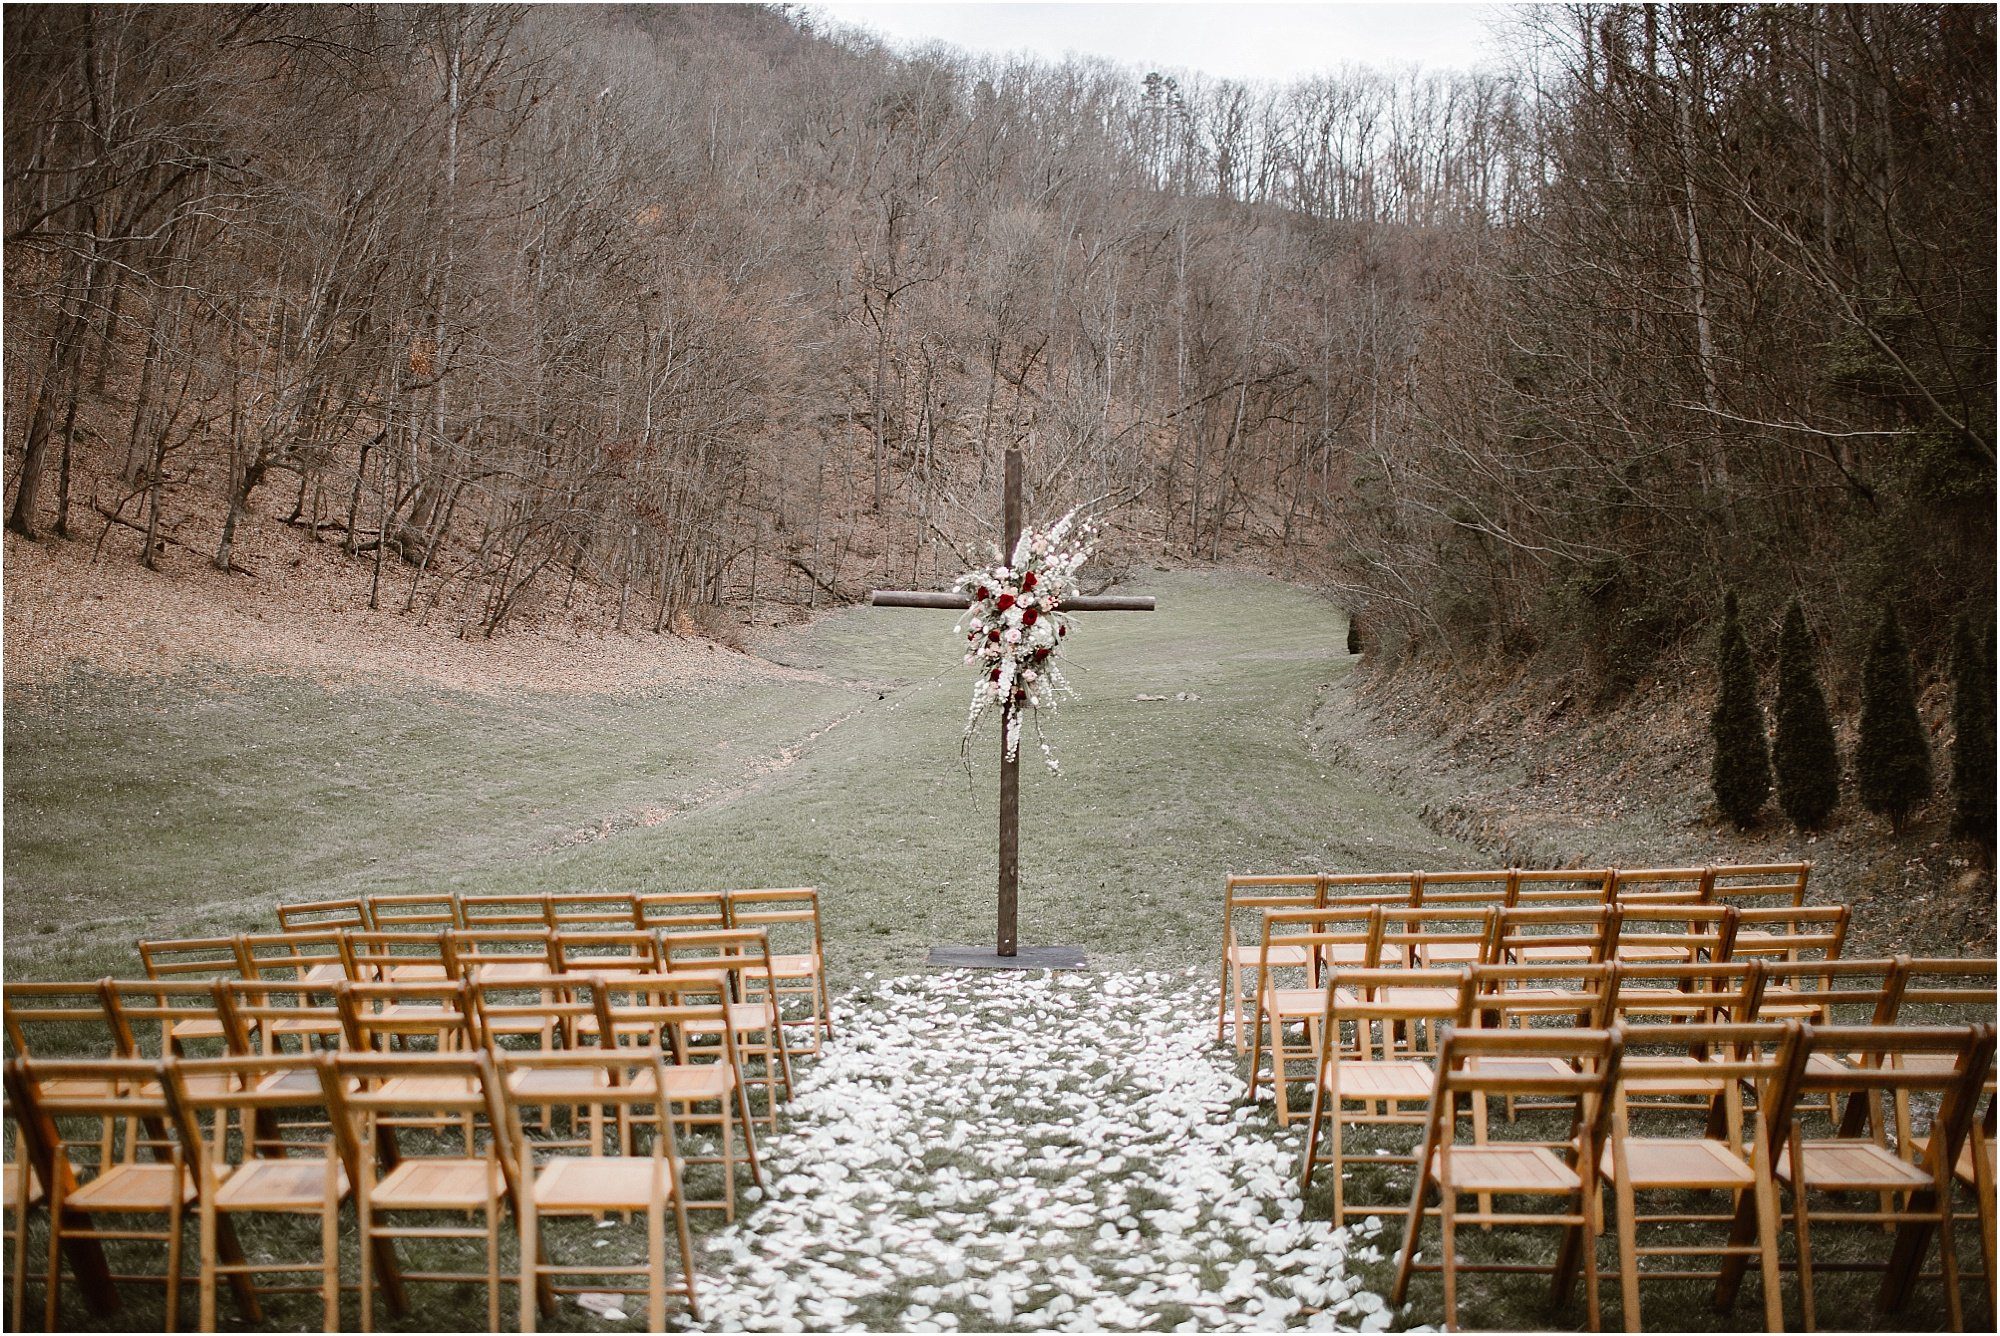 Winter Weddings at The Barn at Chestnut Springs | Erin Morrison Photography www.erinmorrisonphotography.com